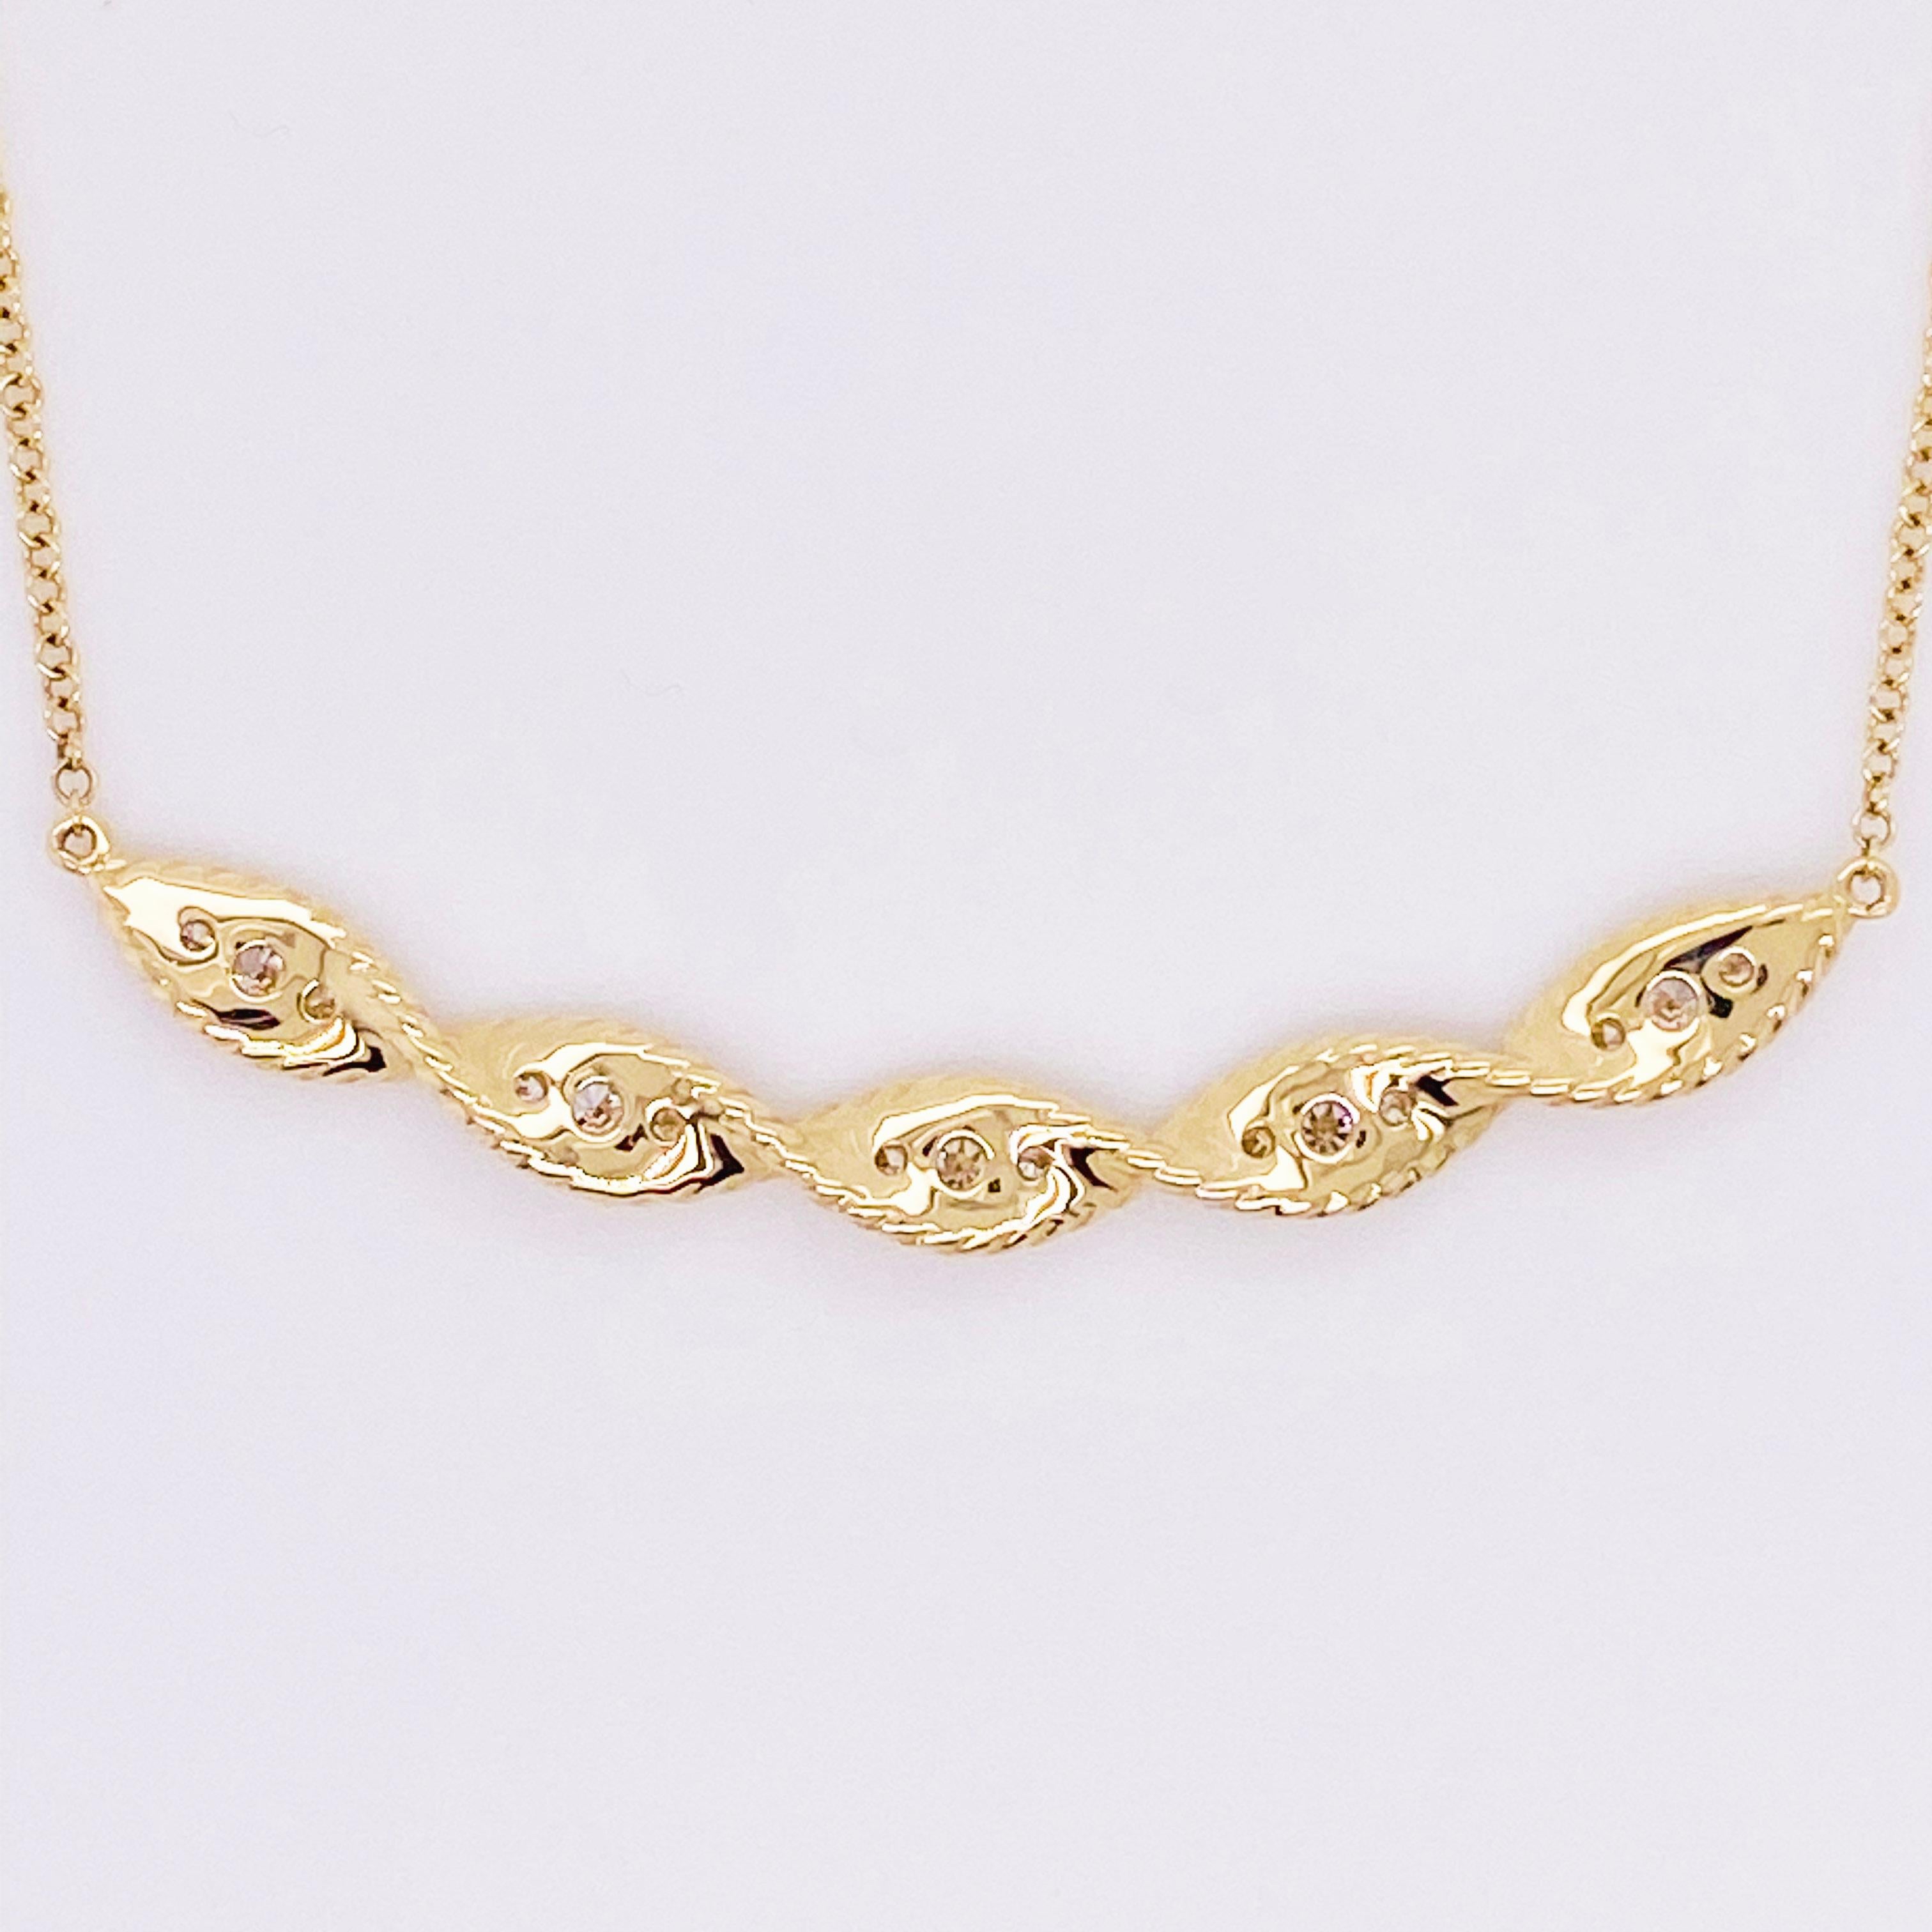 Curved Diamond Necklace, 14 Karat Gold Twisted Rope Bar, NeckMess, NK6085Y45JJ In New Condition For Sale In Austin, TX